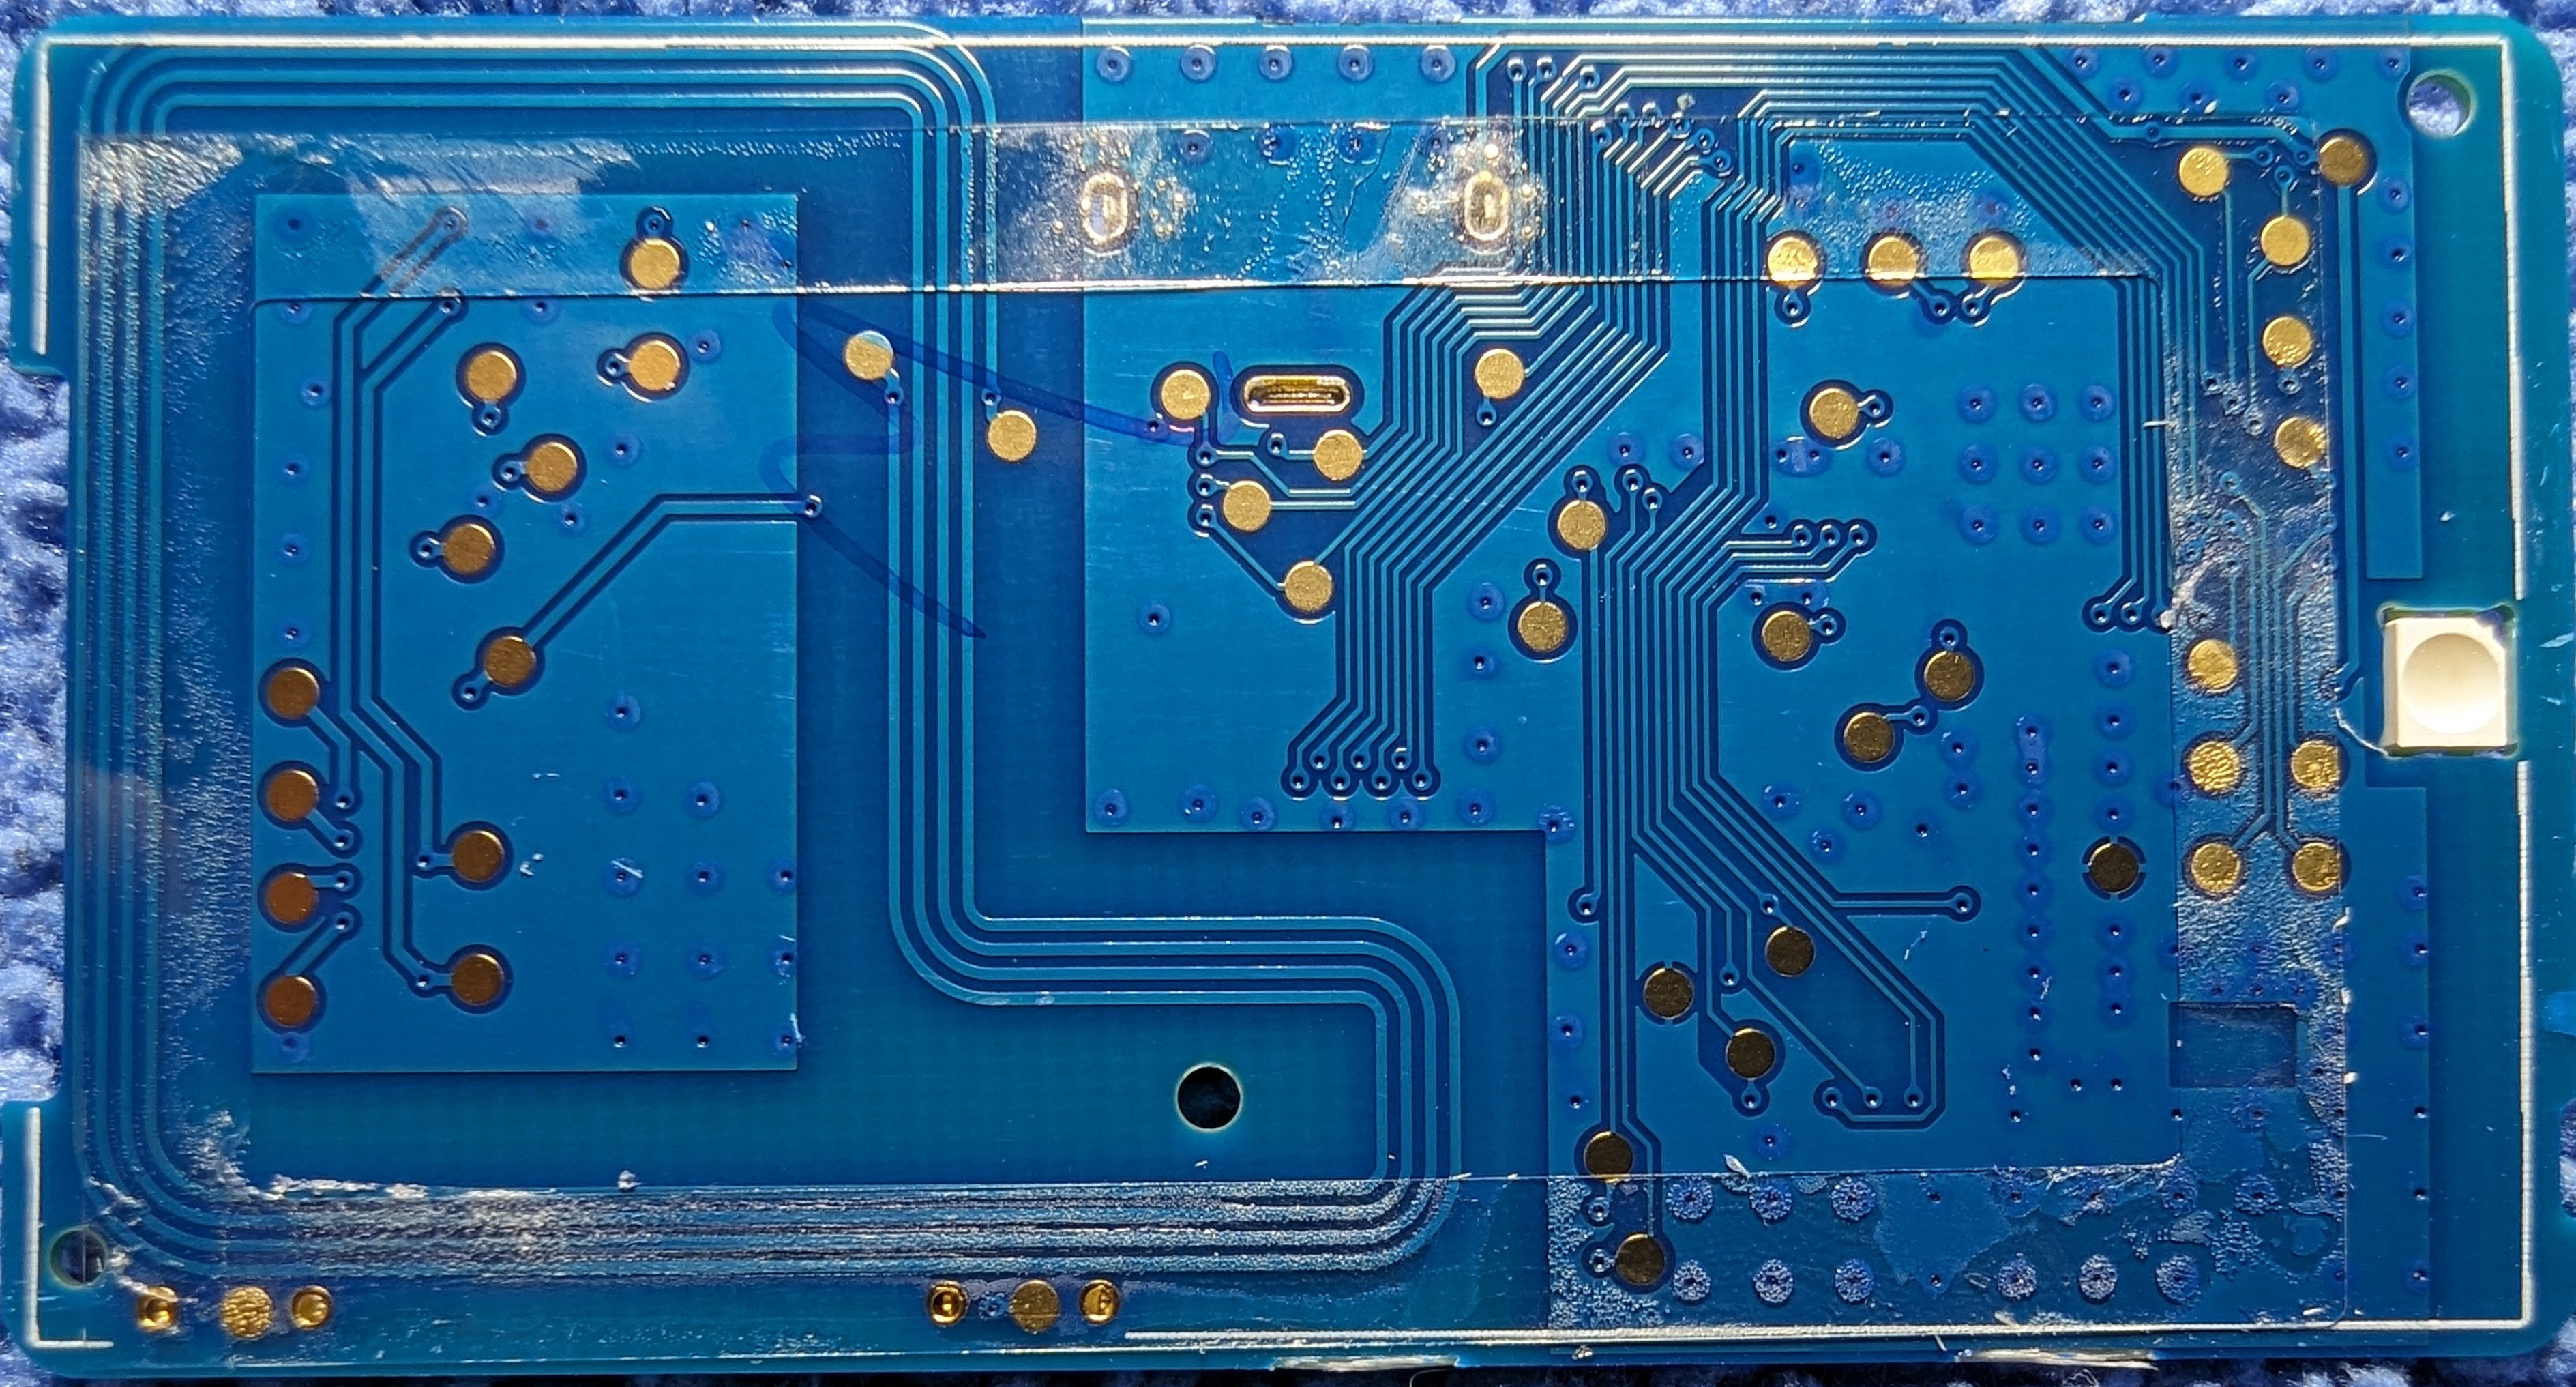 Closeup of the side of the PCB normally covered by the eInk panel. Note the thin layer of glue around the edge of the PCB used to hold the eInk panel in place.